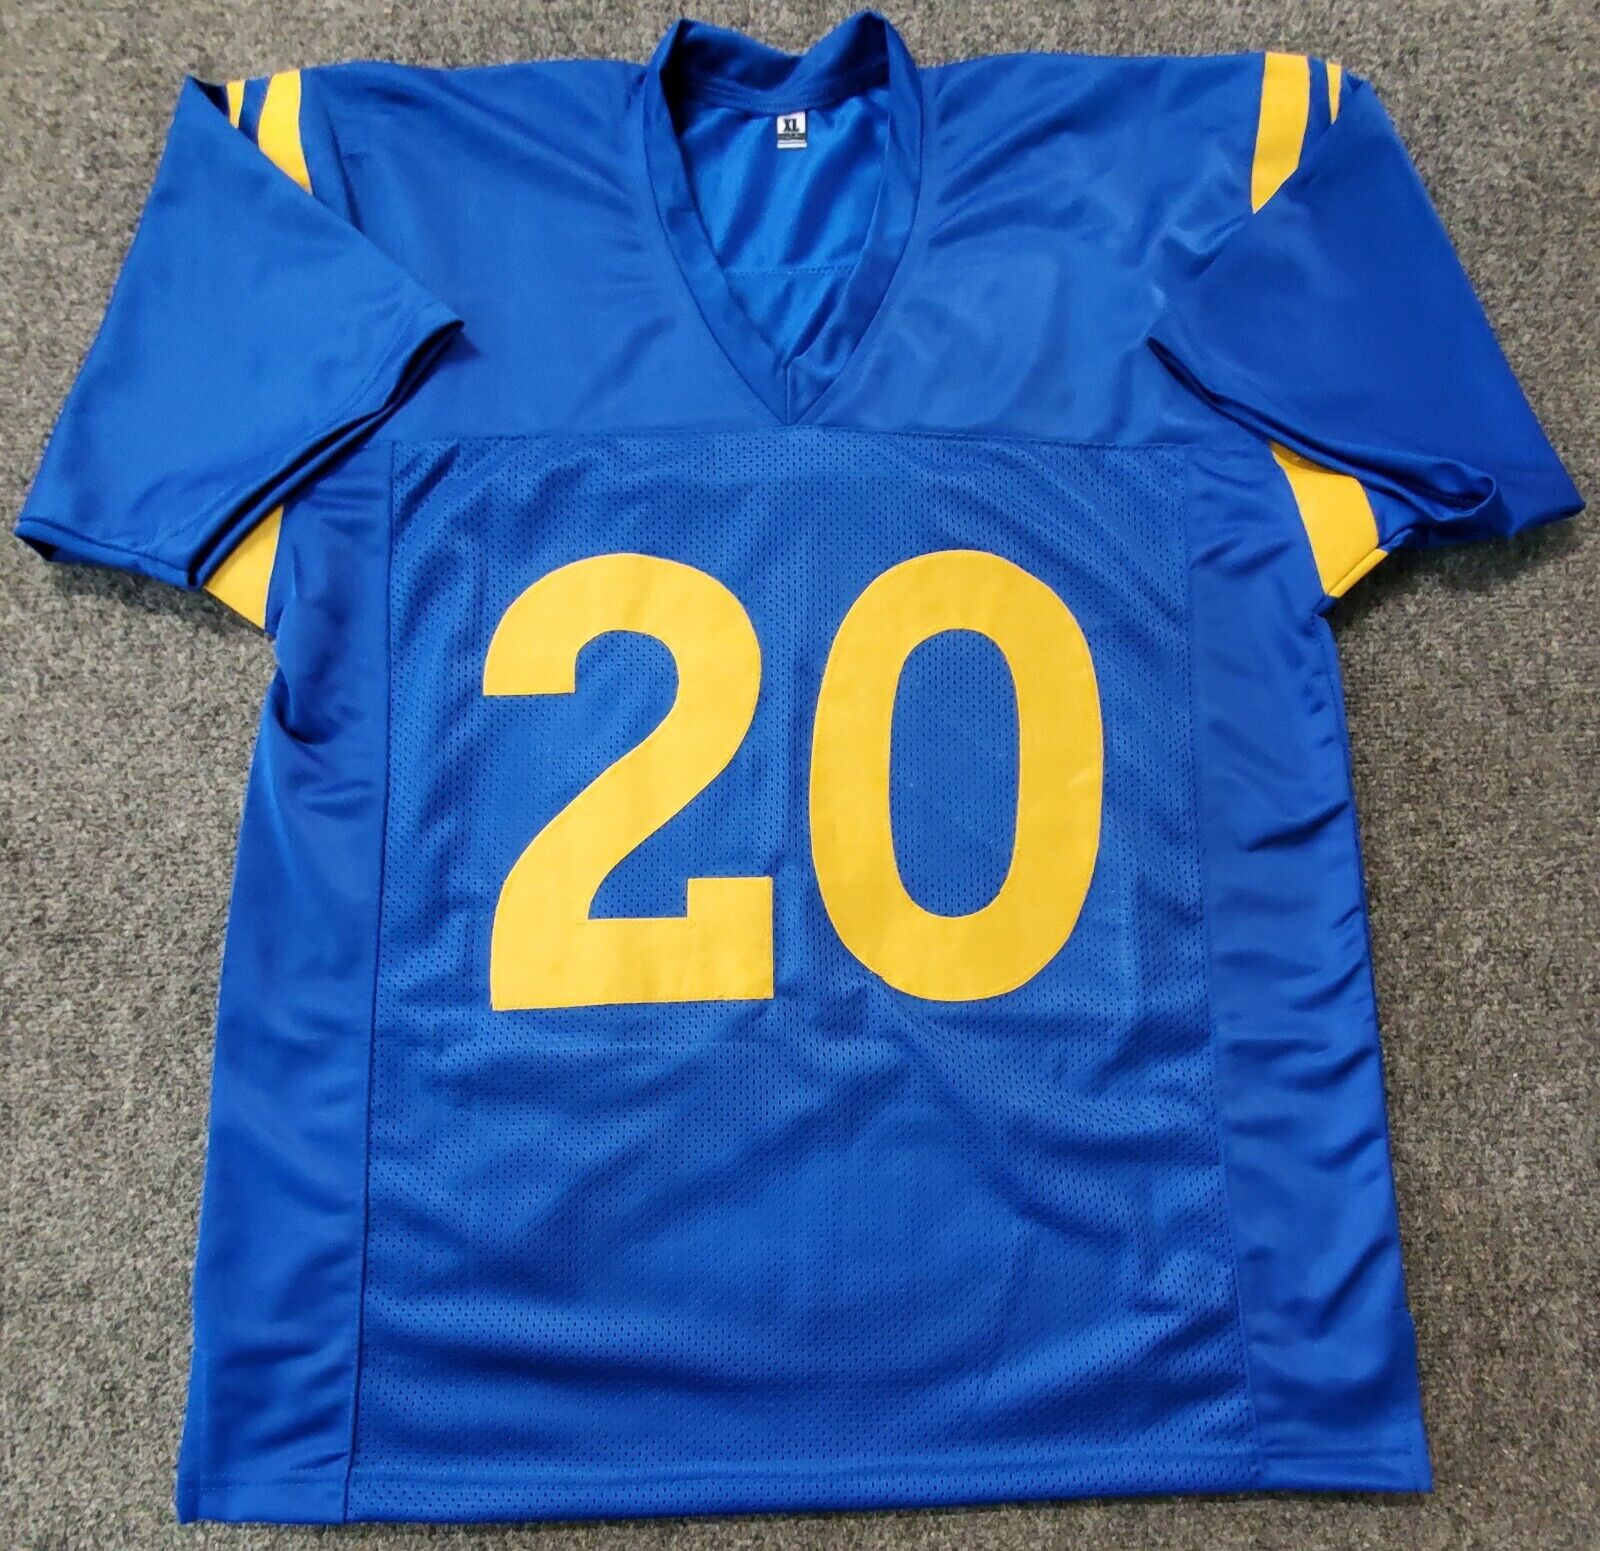 Los Angeles Rams Eric Weddle Autographed Signed Inscribed Jersey